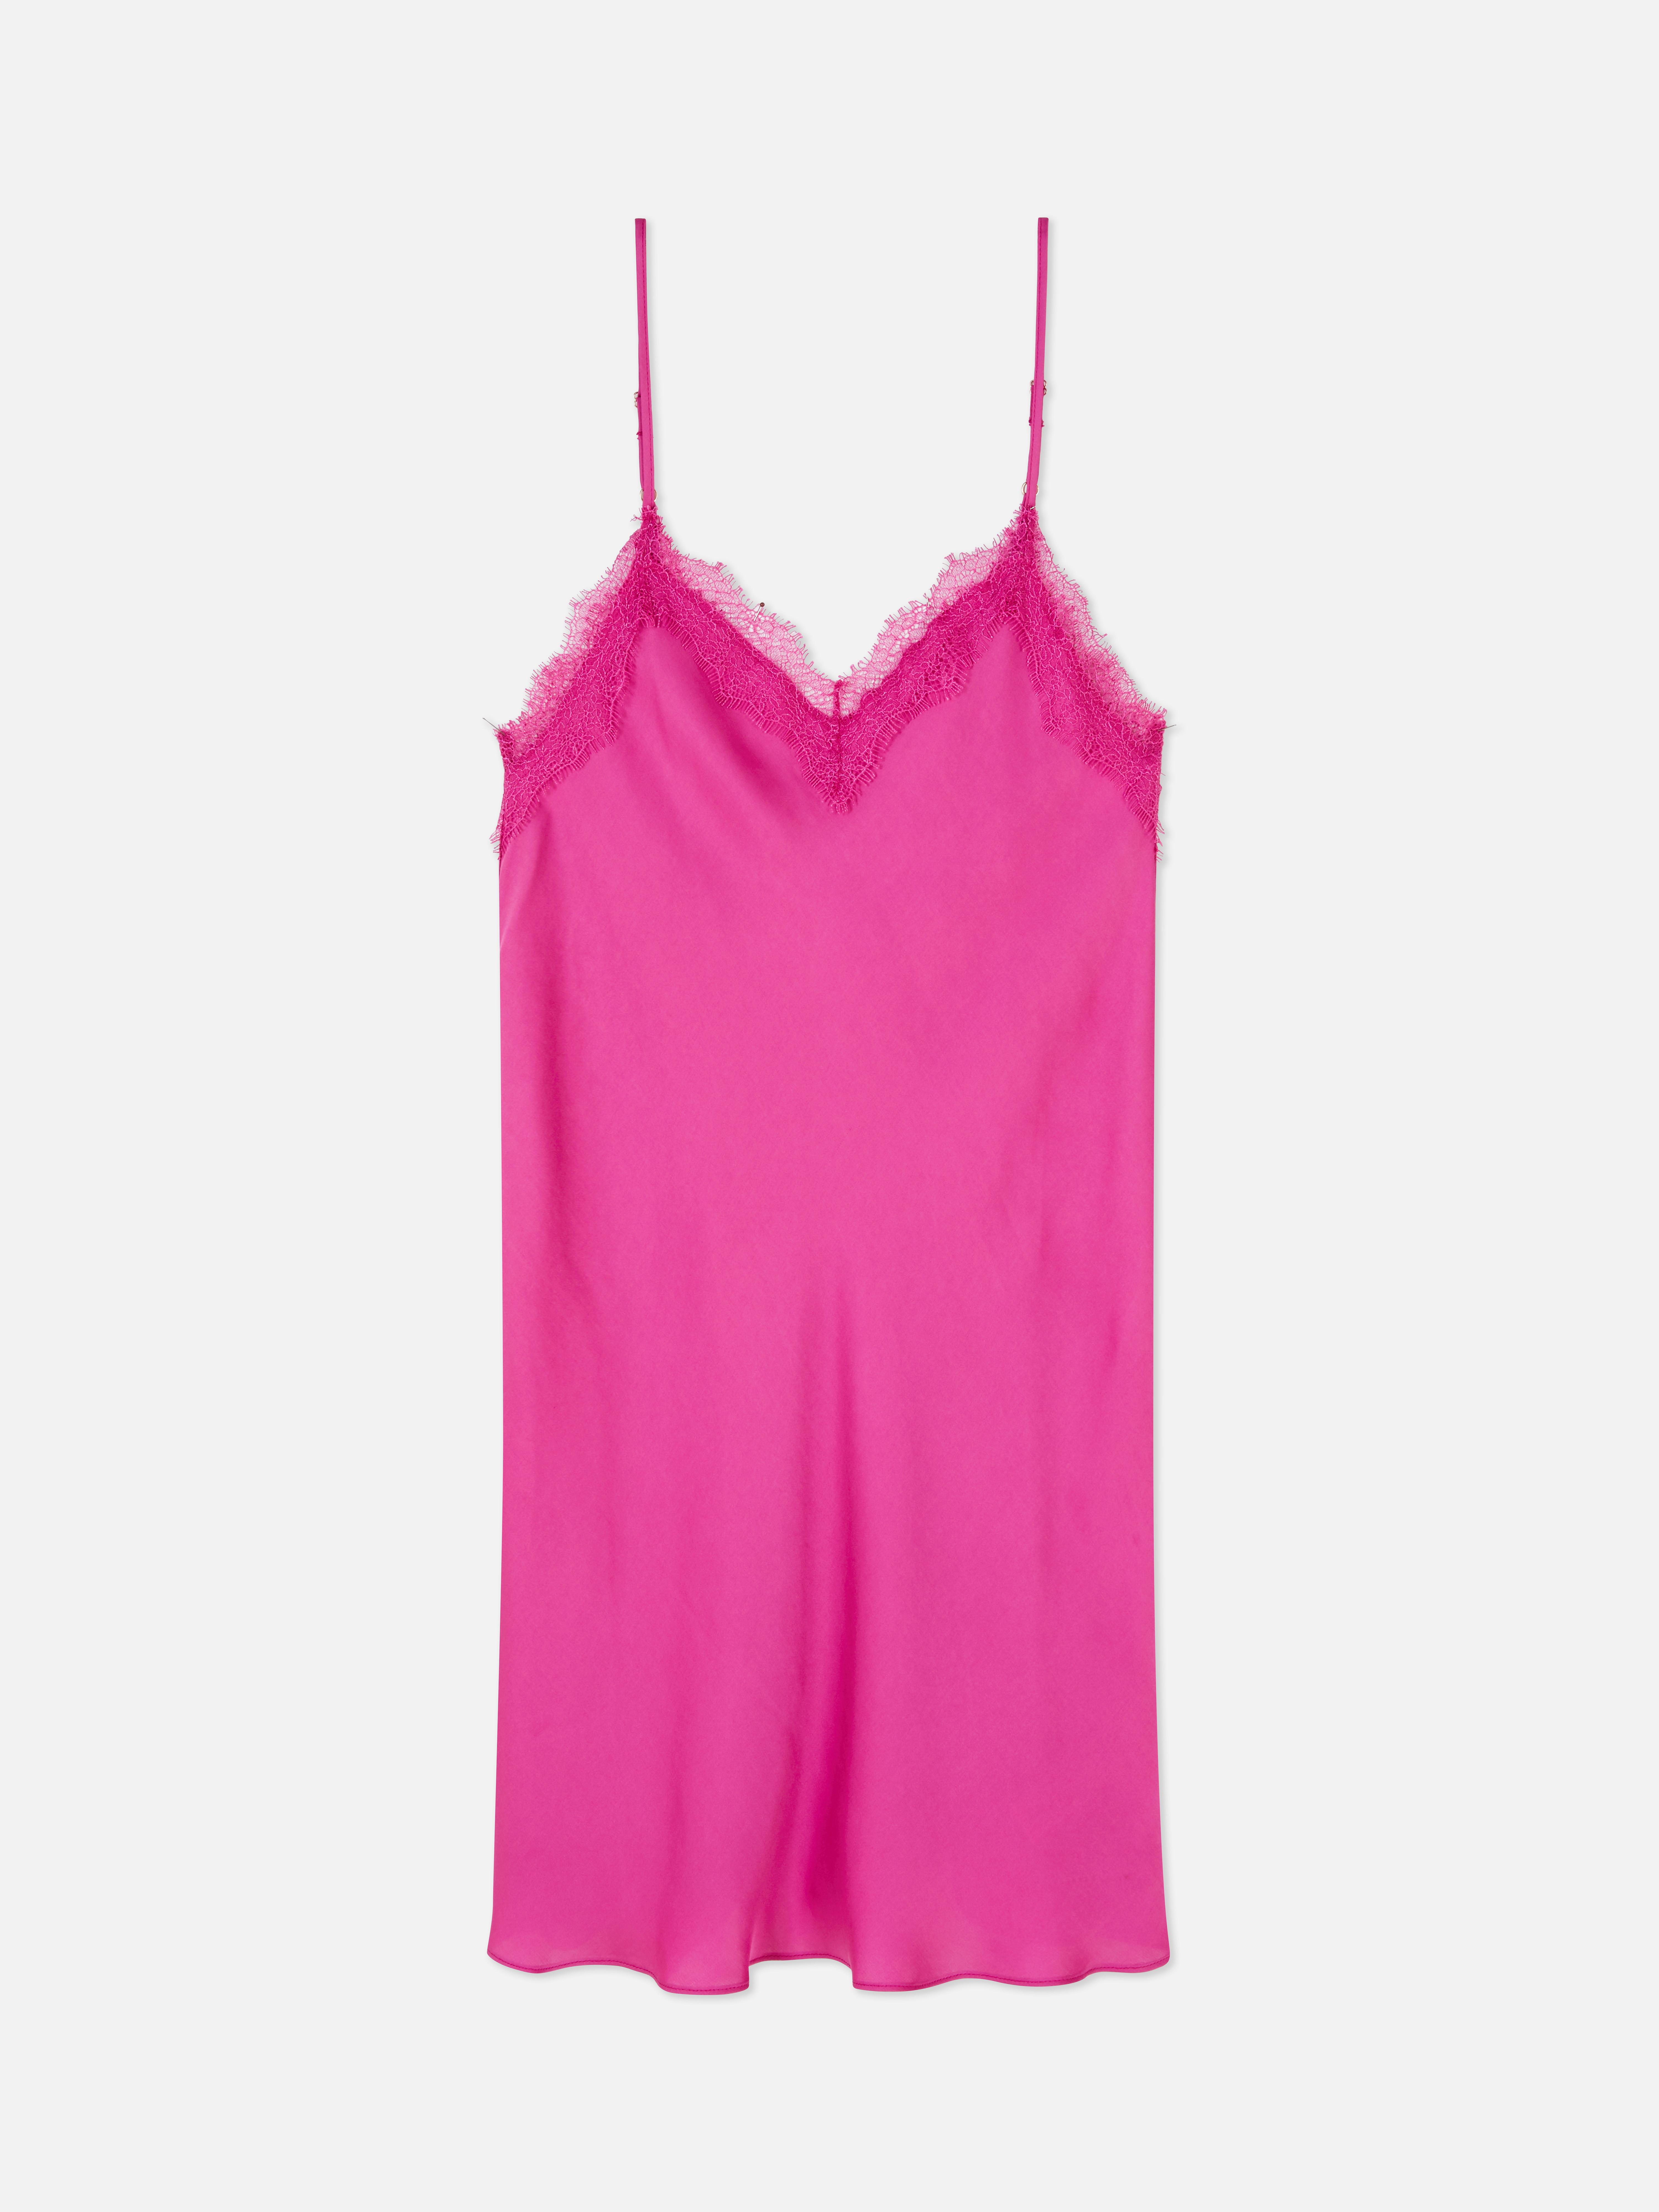 Satin Lace Trimmed Chemise Nightdress